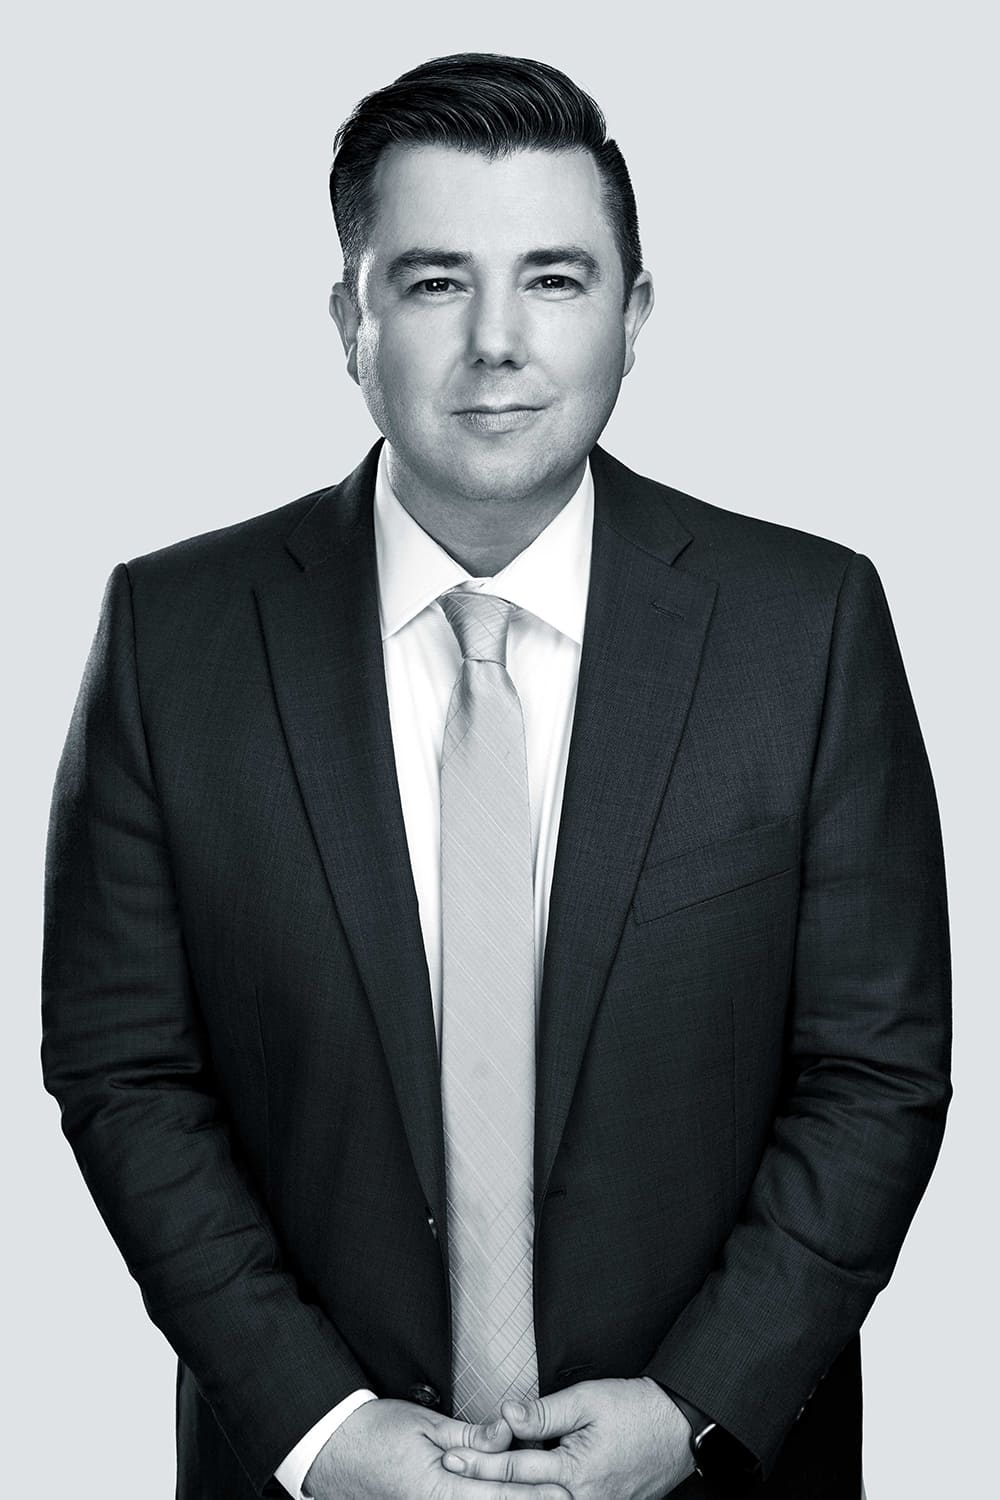 Attorney David Stein is a passionate advocate for those being investigated for or accused of any criminal offense. Mr. Stein has a broad range of experience in all aspects of criminal defense, and he uses his exceptional investigative abilities and calculated defense strategies to achieve the best possible outcomes for clients.